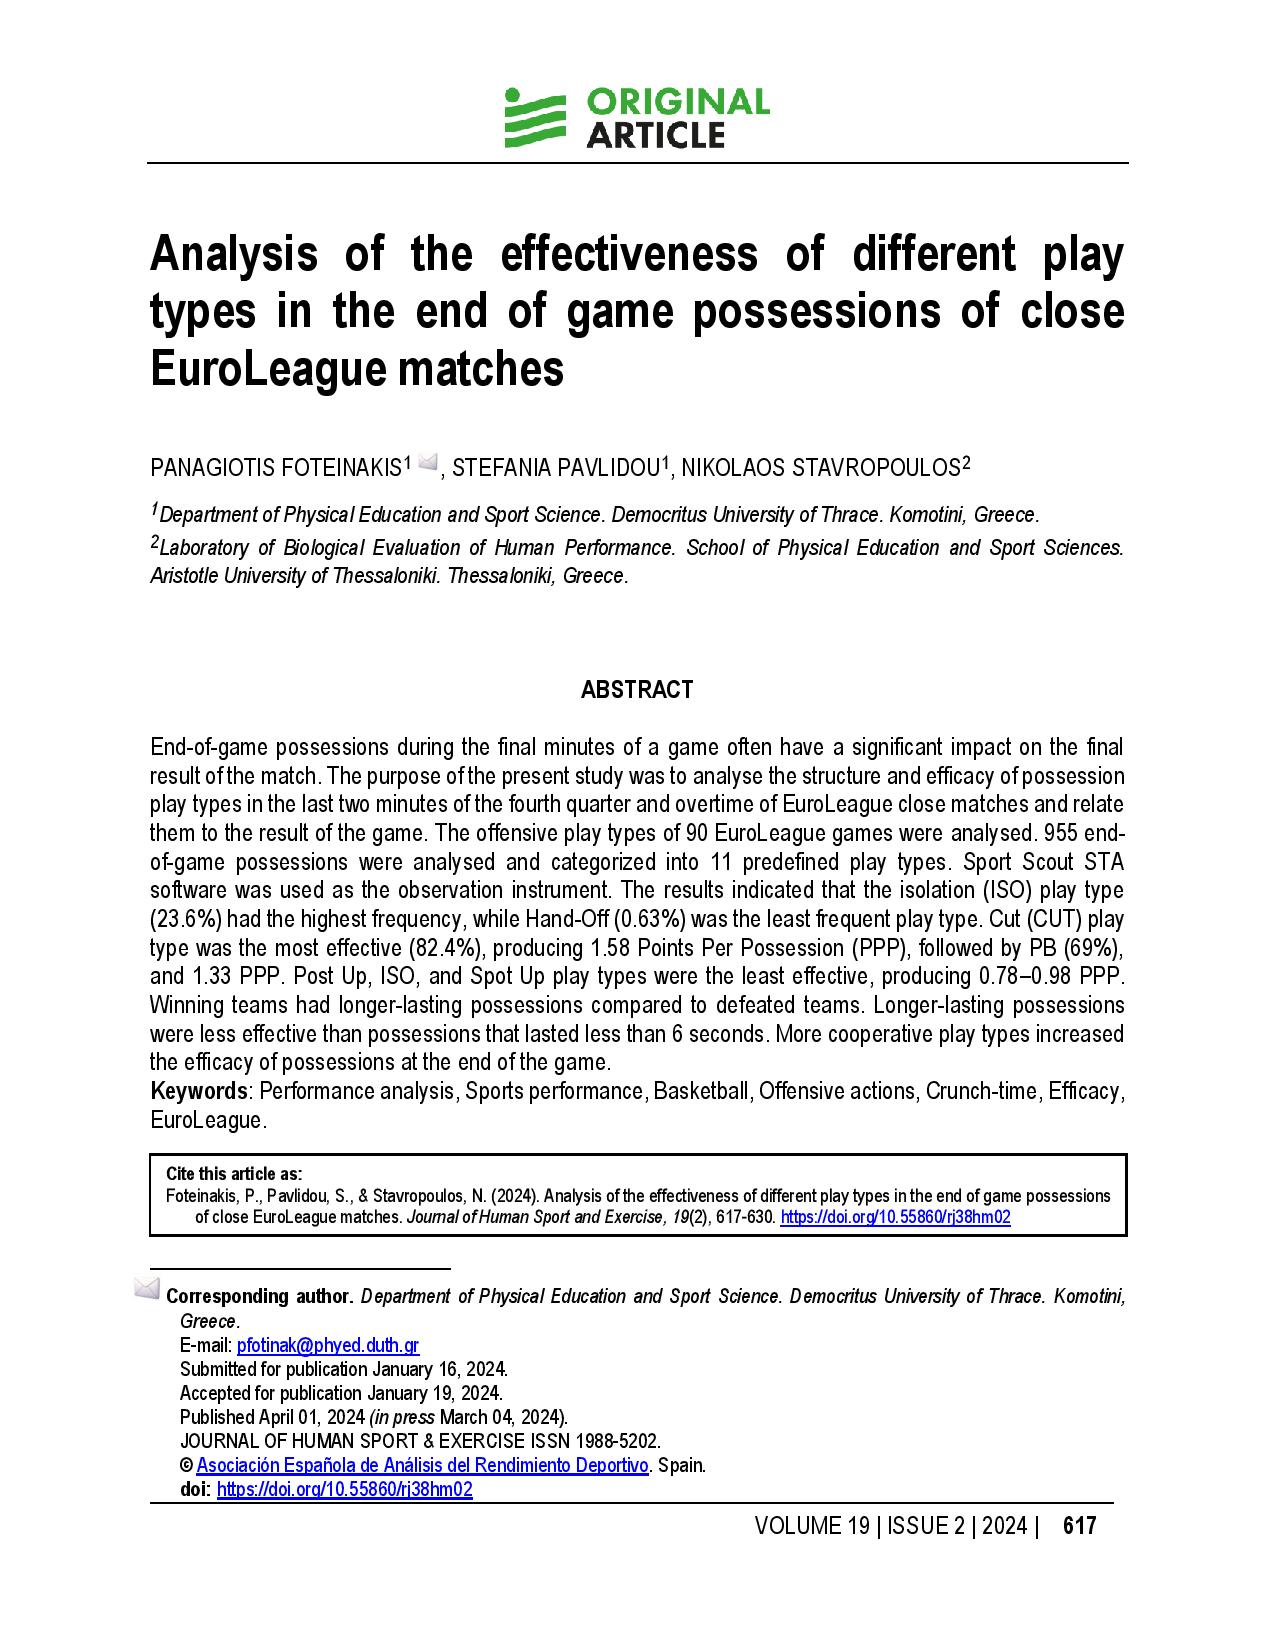 Analysis of the effectiveness of different play types in the end of game possessions of close EuroLeague matches